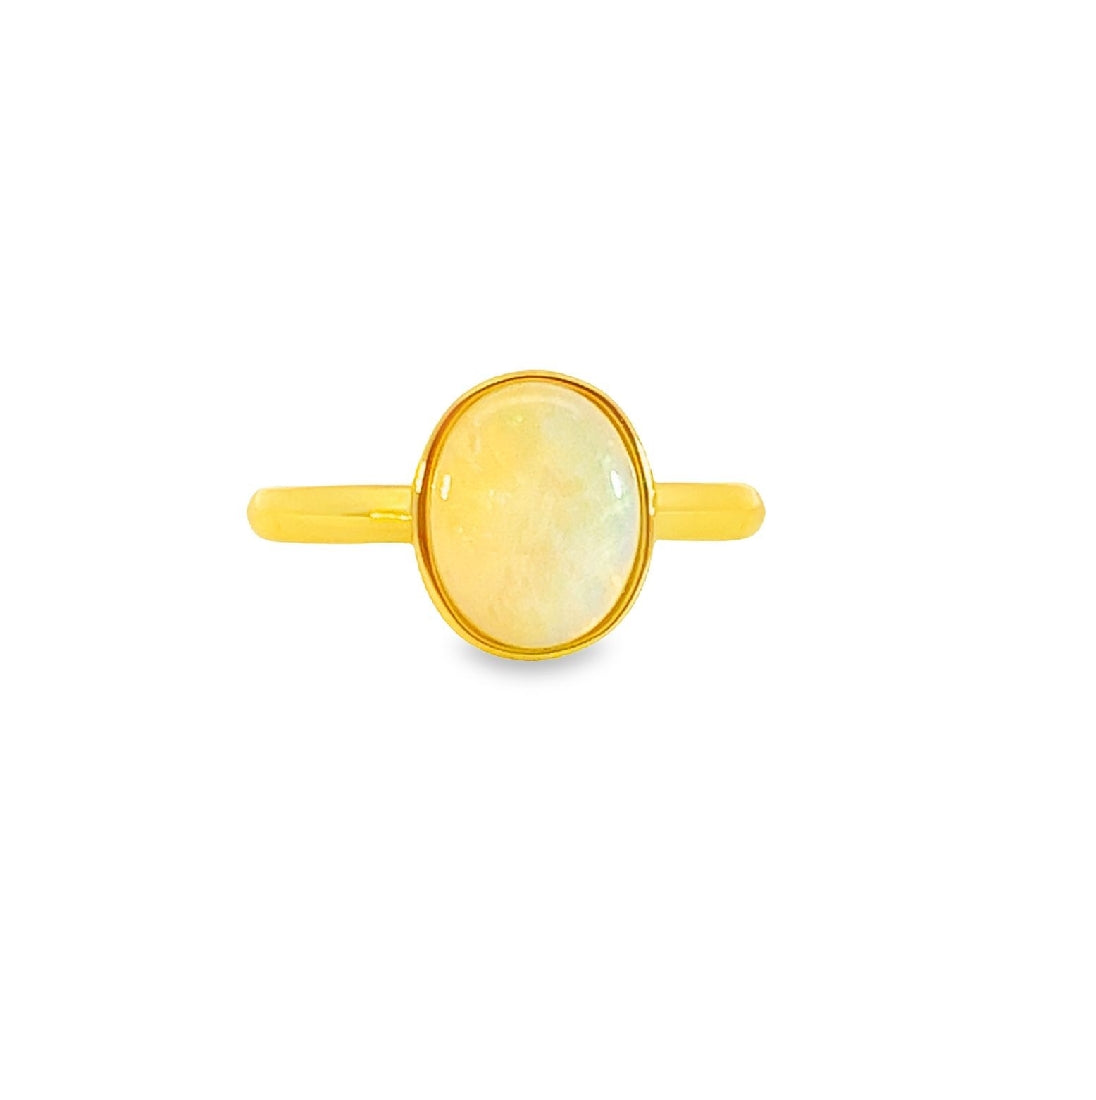 Gold-Plated Sterling Silver Ring - 10x8mm White Opal Solitaire, Bezel Set, Minimalist Gemstone Jewelry, Ideal Gift for Her - Masterpiece Jewellery Opal & Gems Sydney Australia | Online Shop